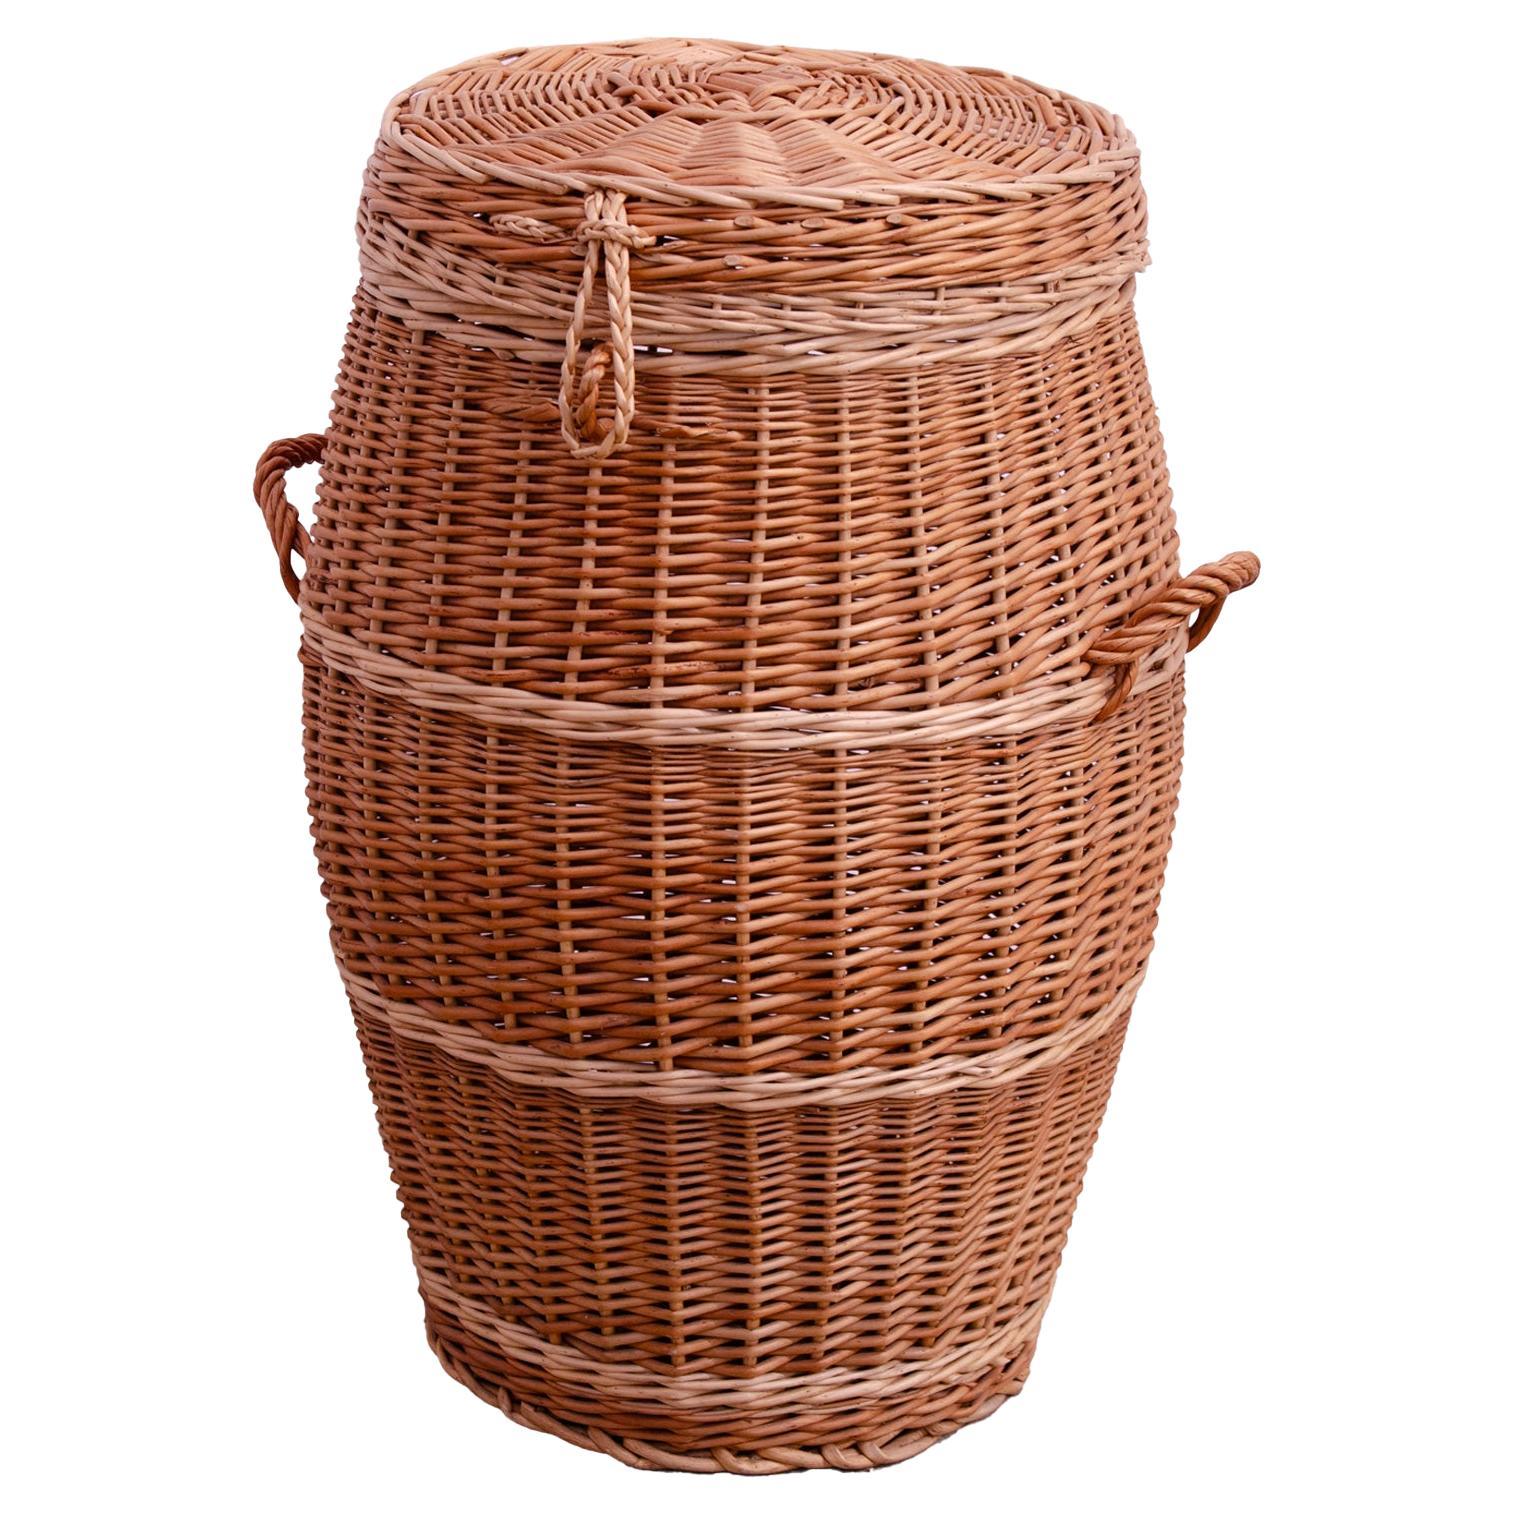 What can I do with old wicker baskets?